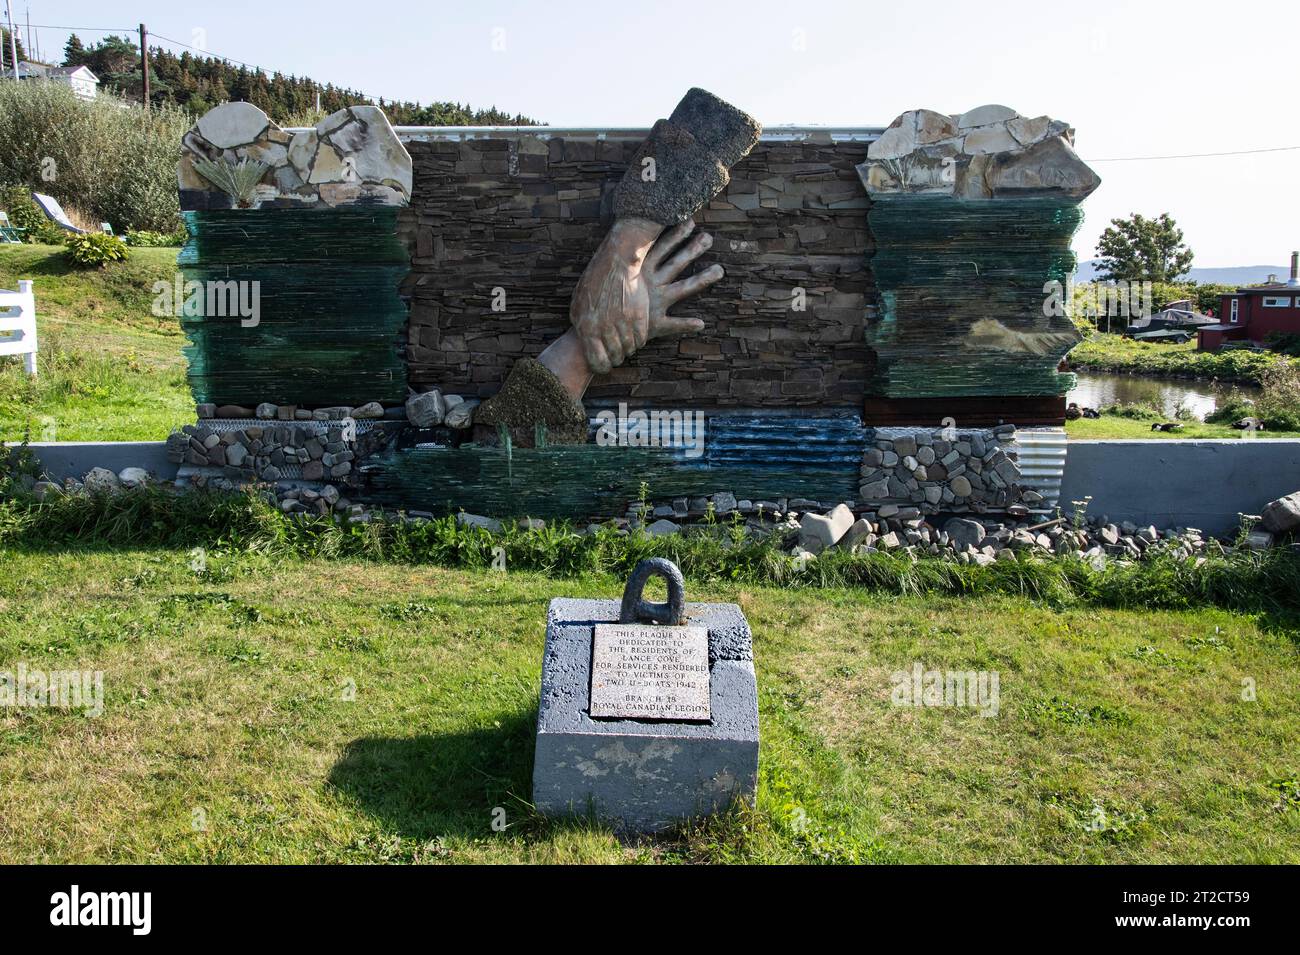 Sculpture of grasping hands at the Seaman's Memorial at Lance Cove on Bell Island, Newfoundland & Labrador, Canada Stock Photo